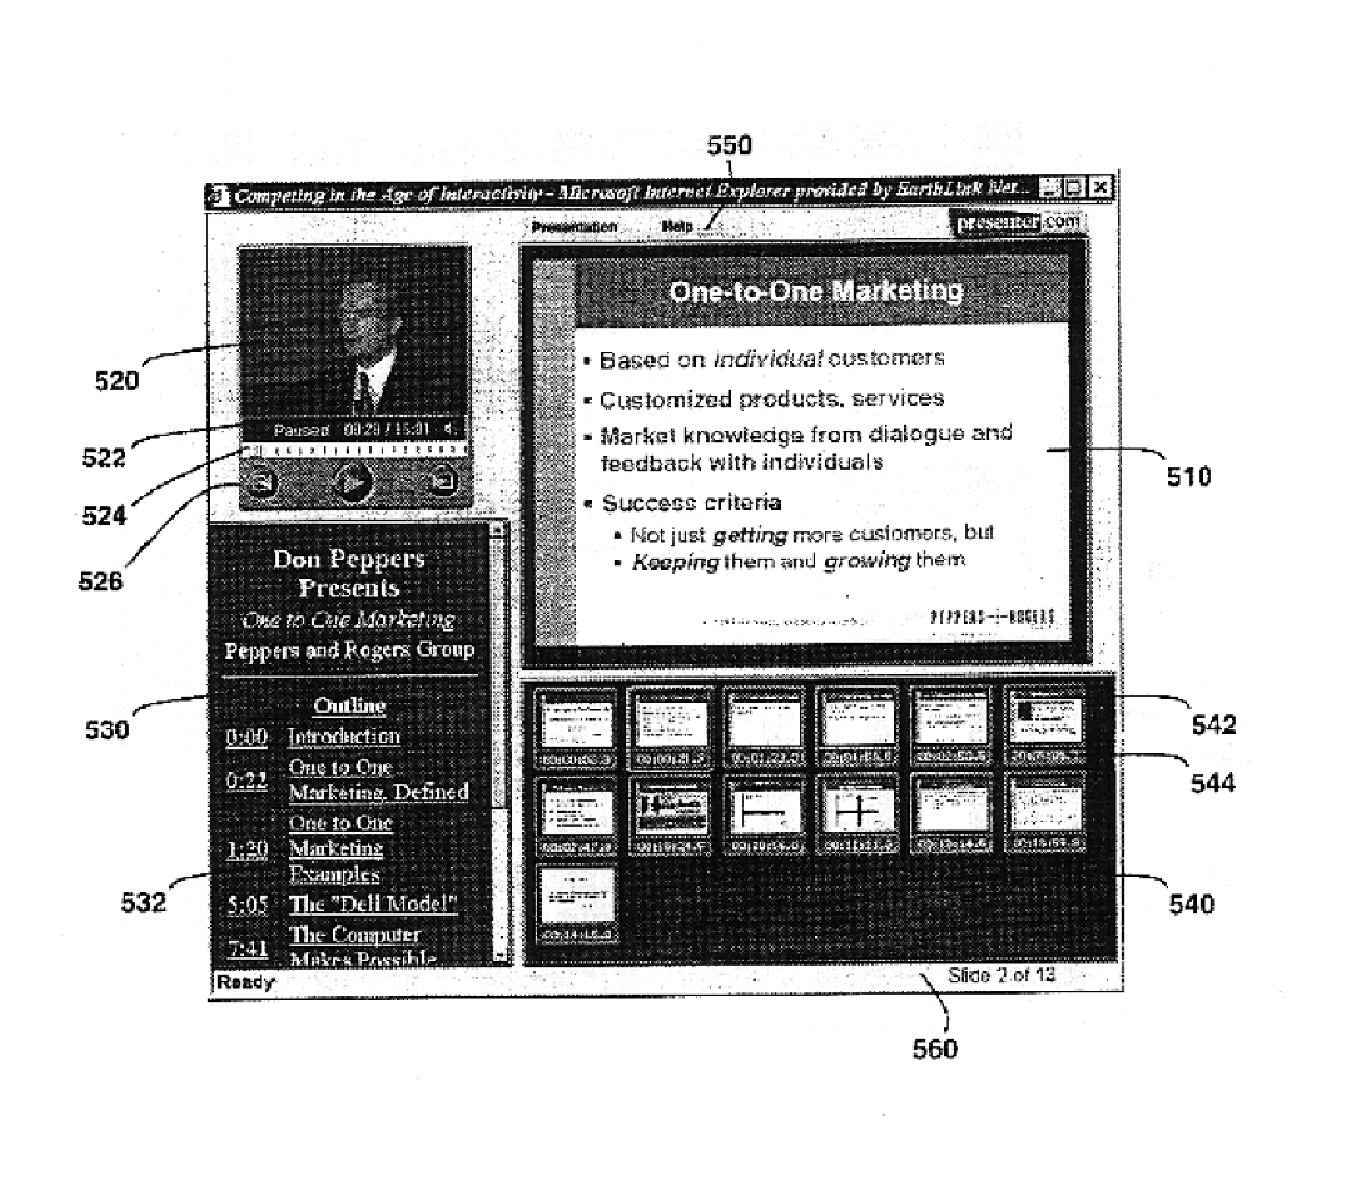 On-demand presentation graphical user interface